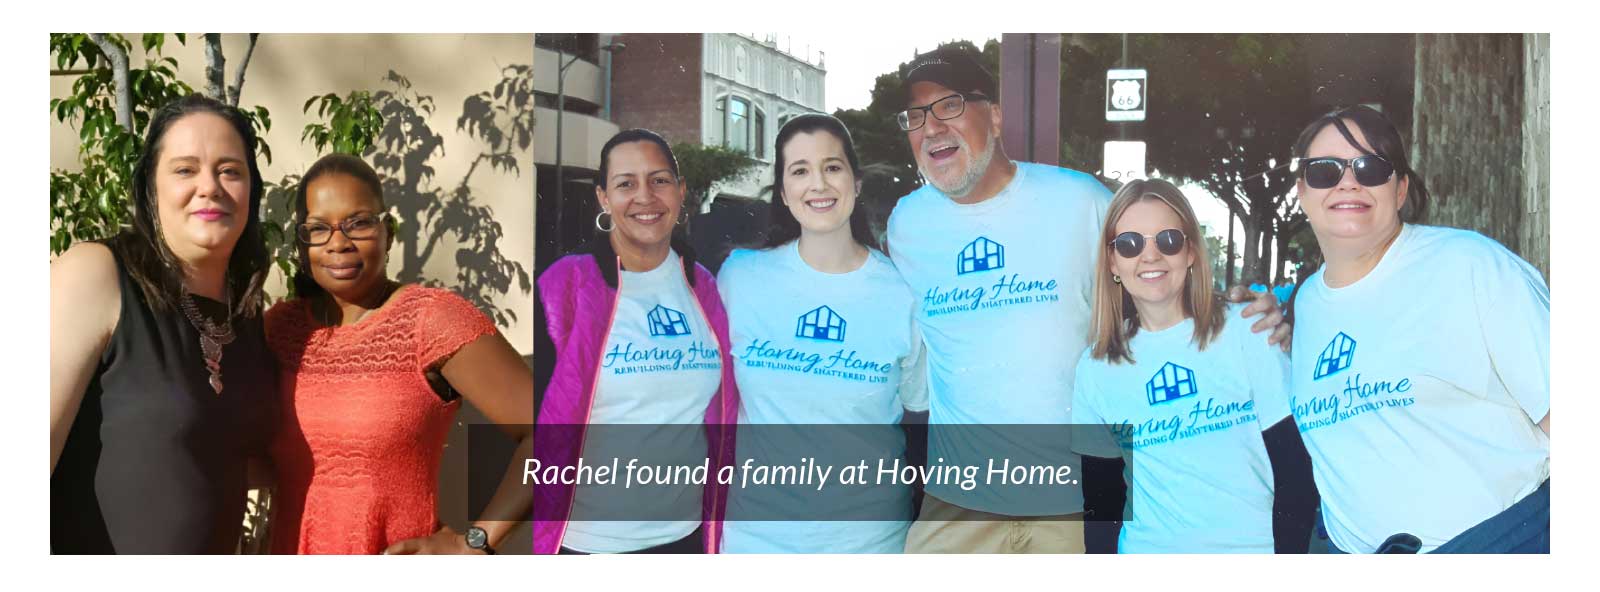 Rachel found a family at Hoving Home.